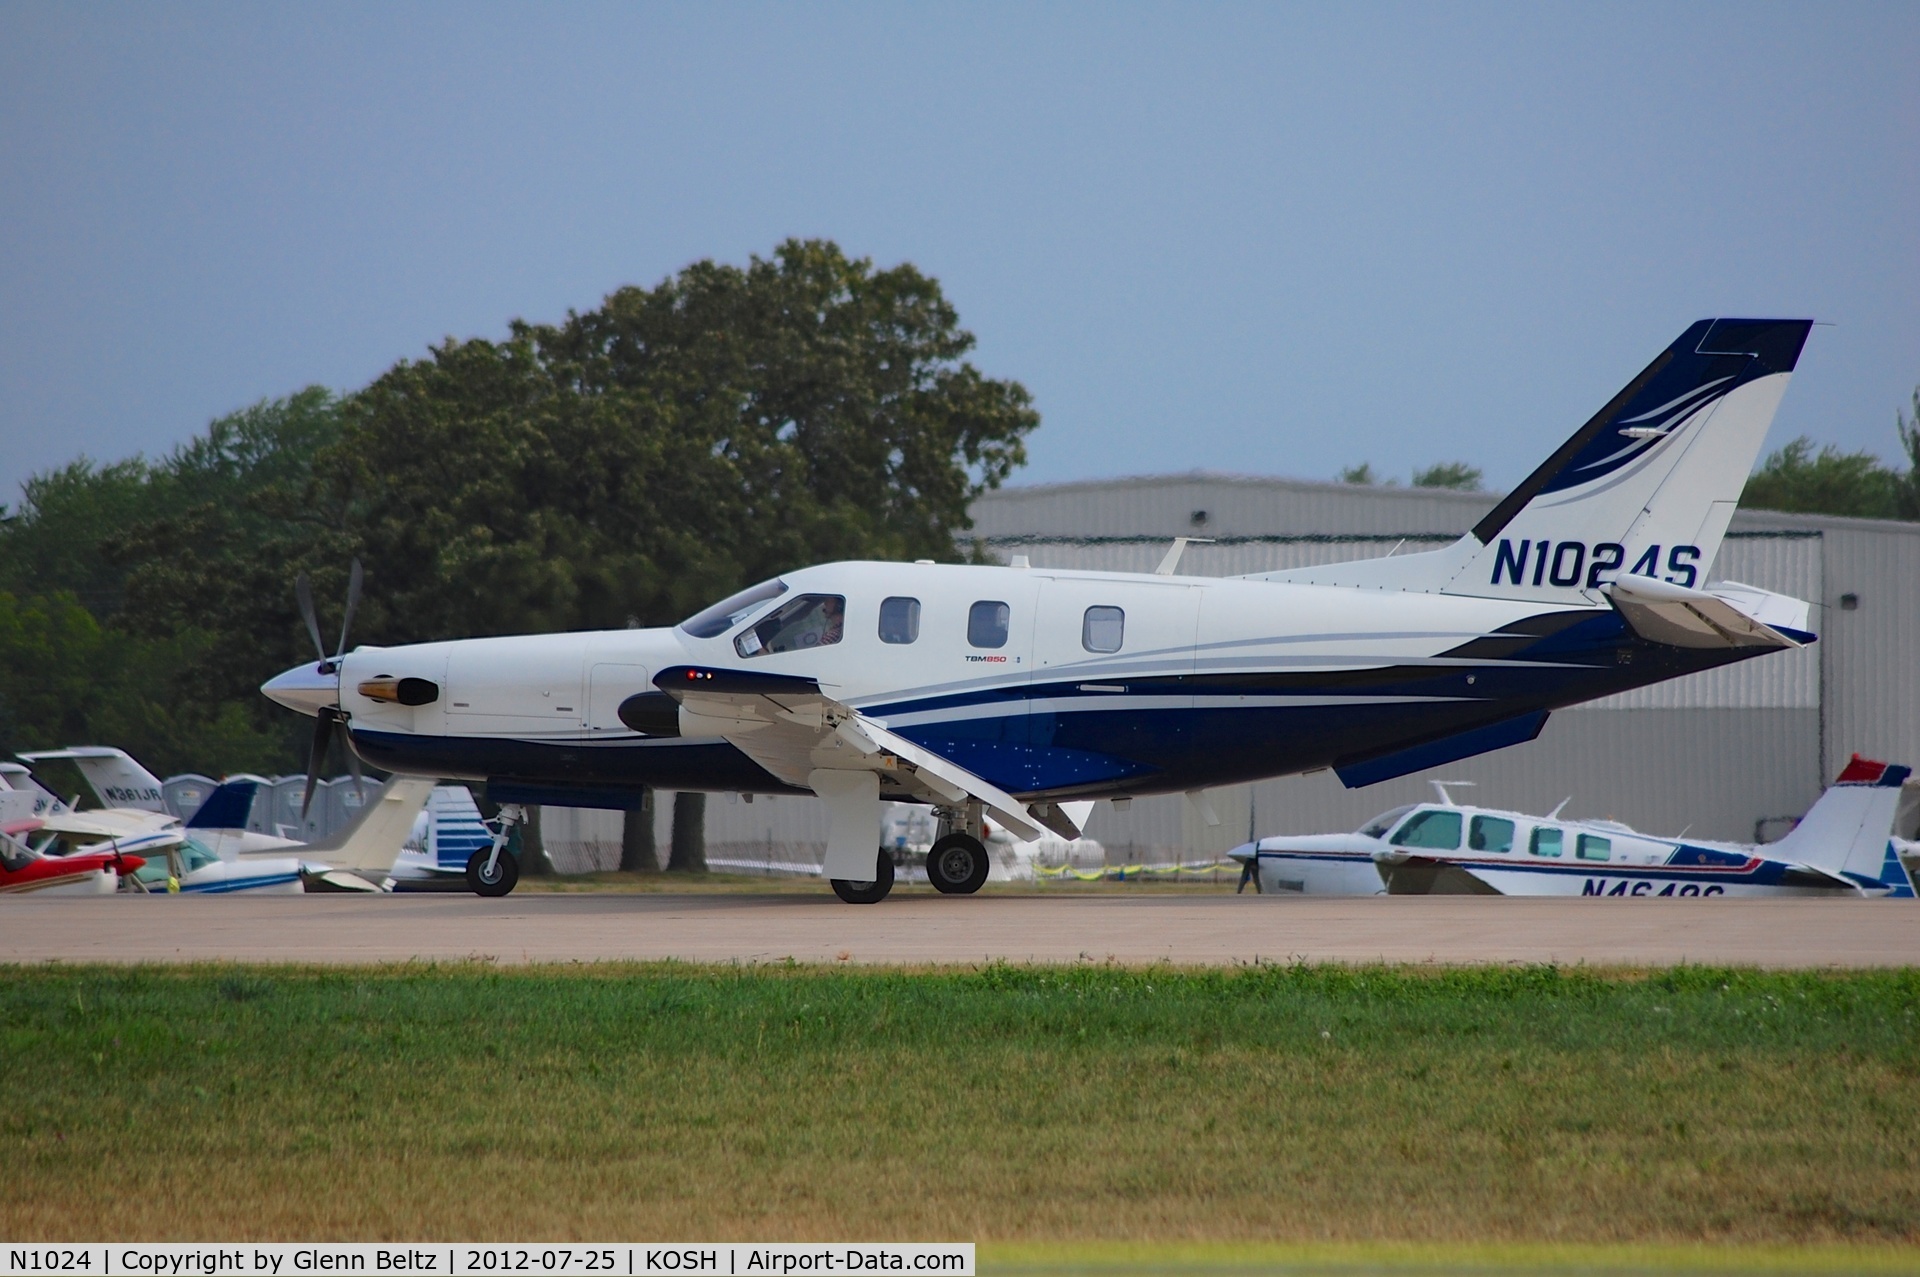 N1024, 1960 Cessna 210 C/N 57425, Taxiing at Oshkosh on 25 July 2012.